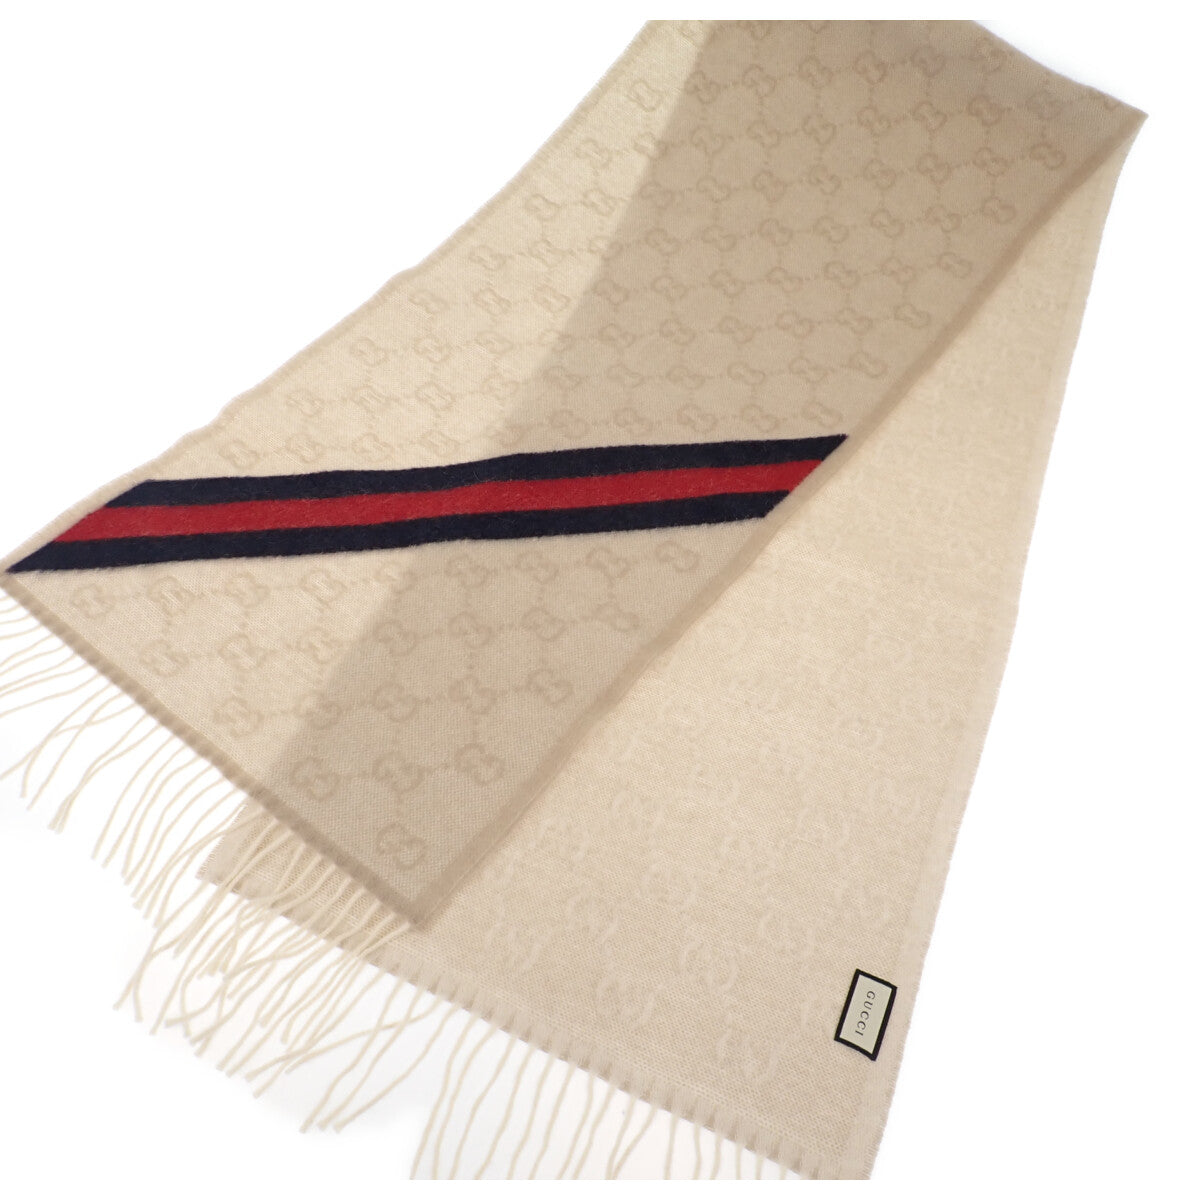 Gucci GG Muffler Wool Scarf  Canvas Scarf 570603 3GB18 9568 in Excellent condition